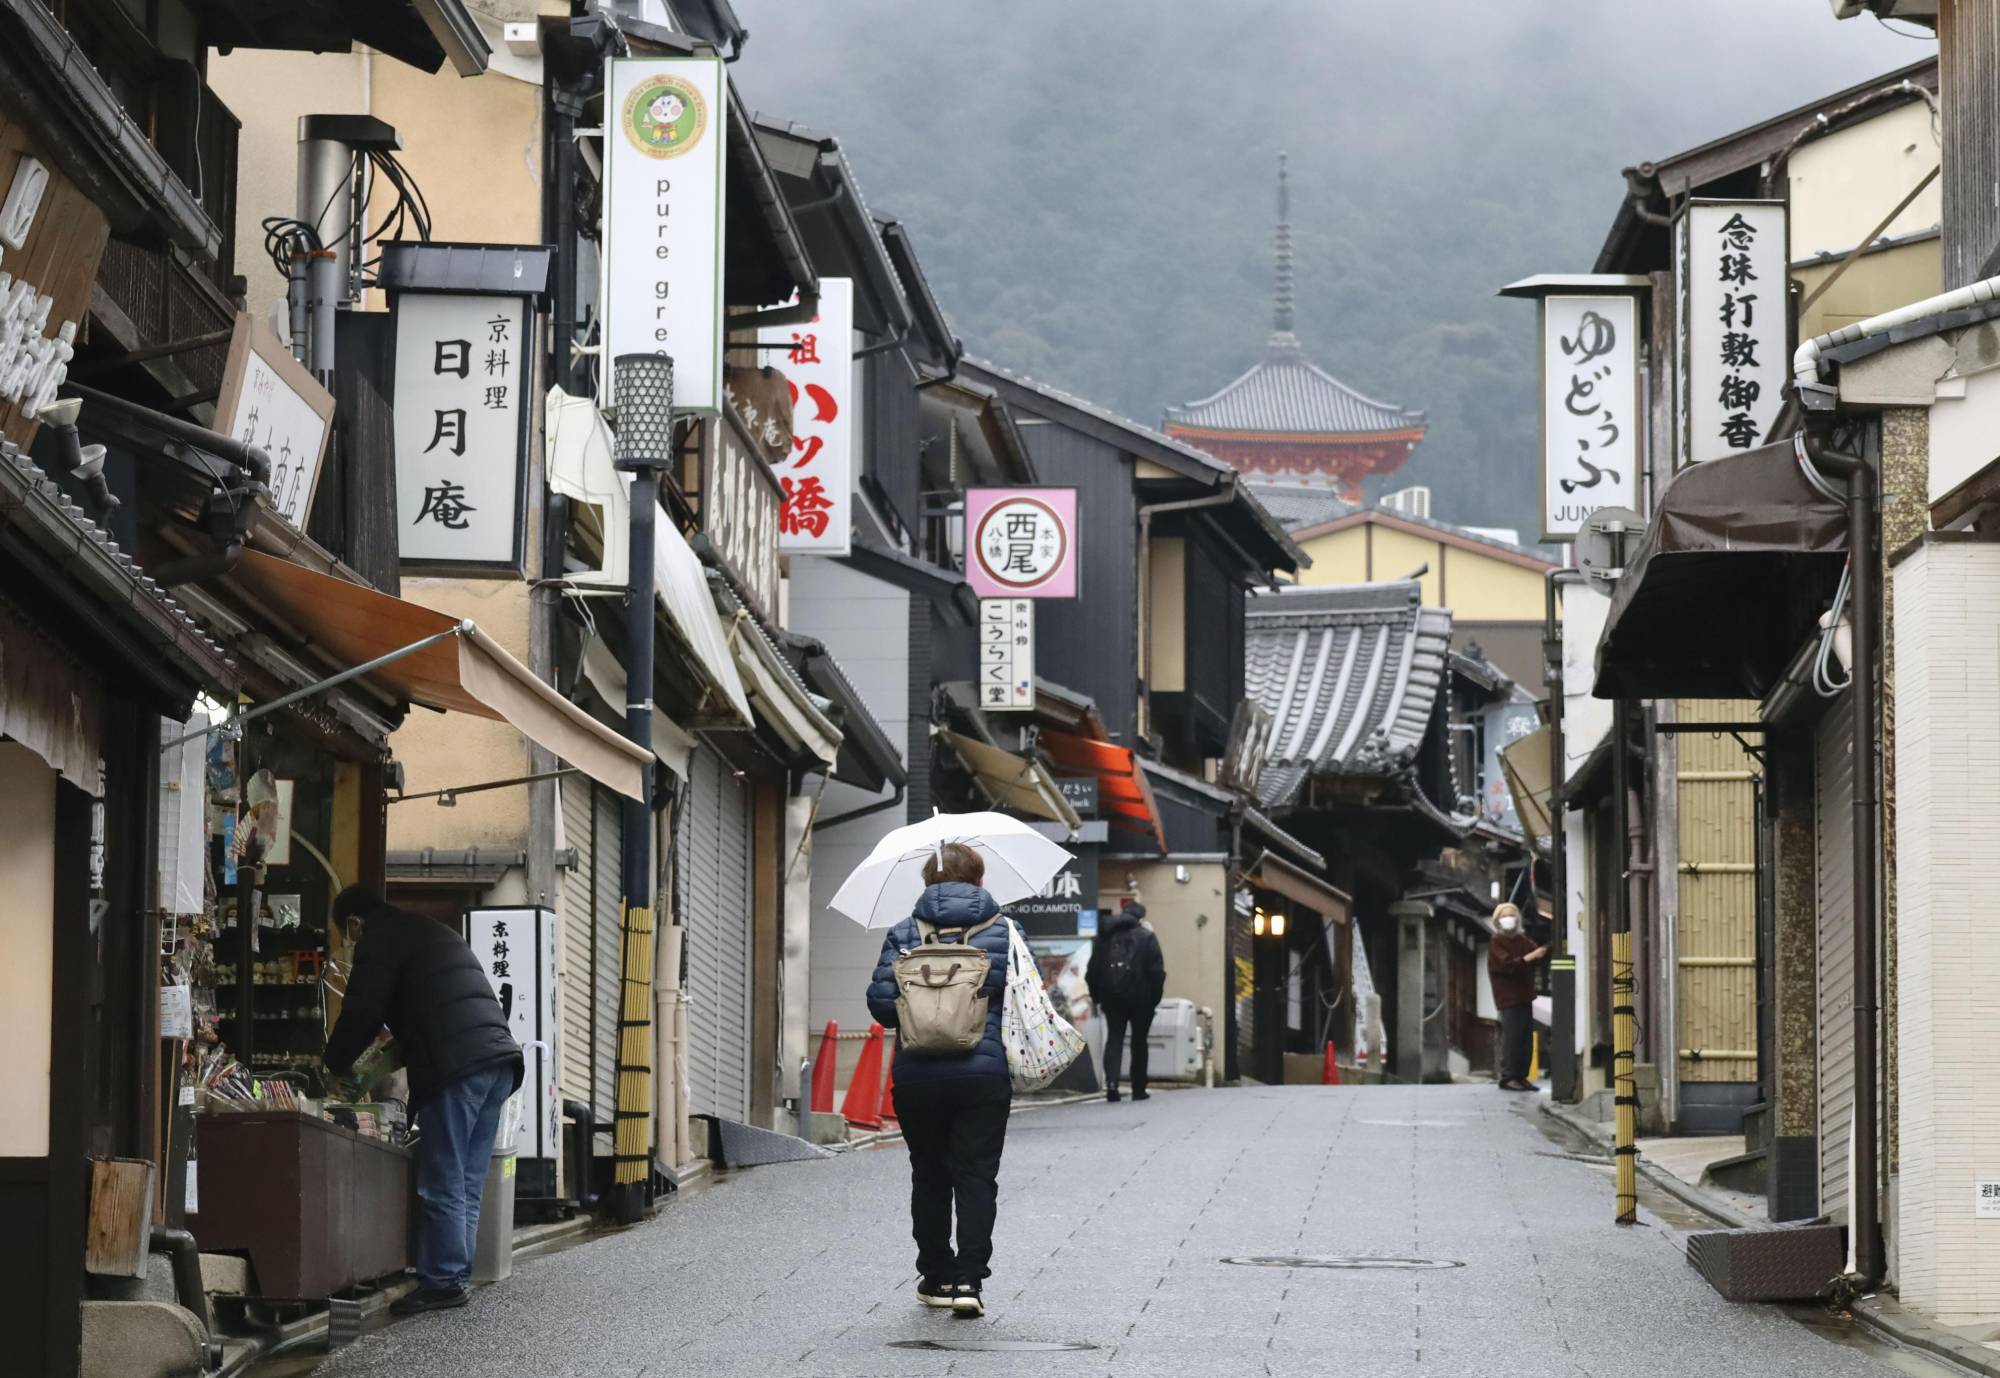 Few people are seen in the usually crowded street near Kiyomizu Temple in Kyoto on Monday, when the nationwide suspension of Go To Travel program began. | KYODO